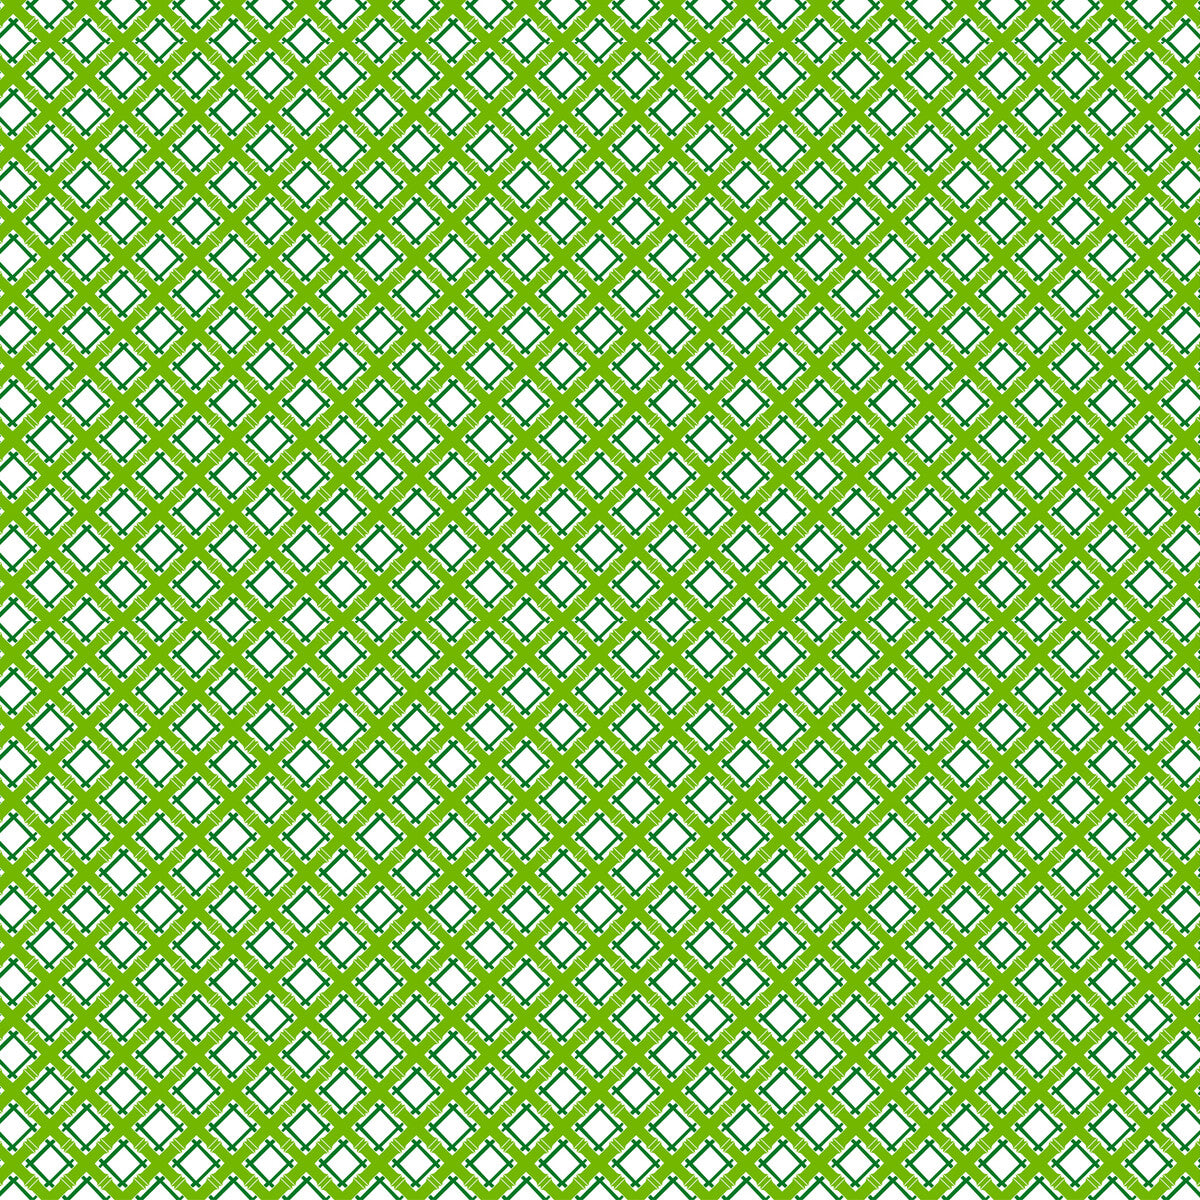 Trellis fabric in verde color - pattern GDT5527.001.0 - by Gaston y Daniela in the Gaston Libreria collection